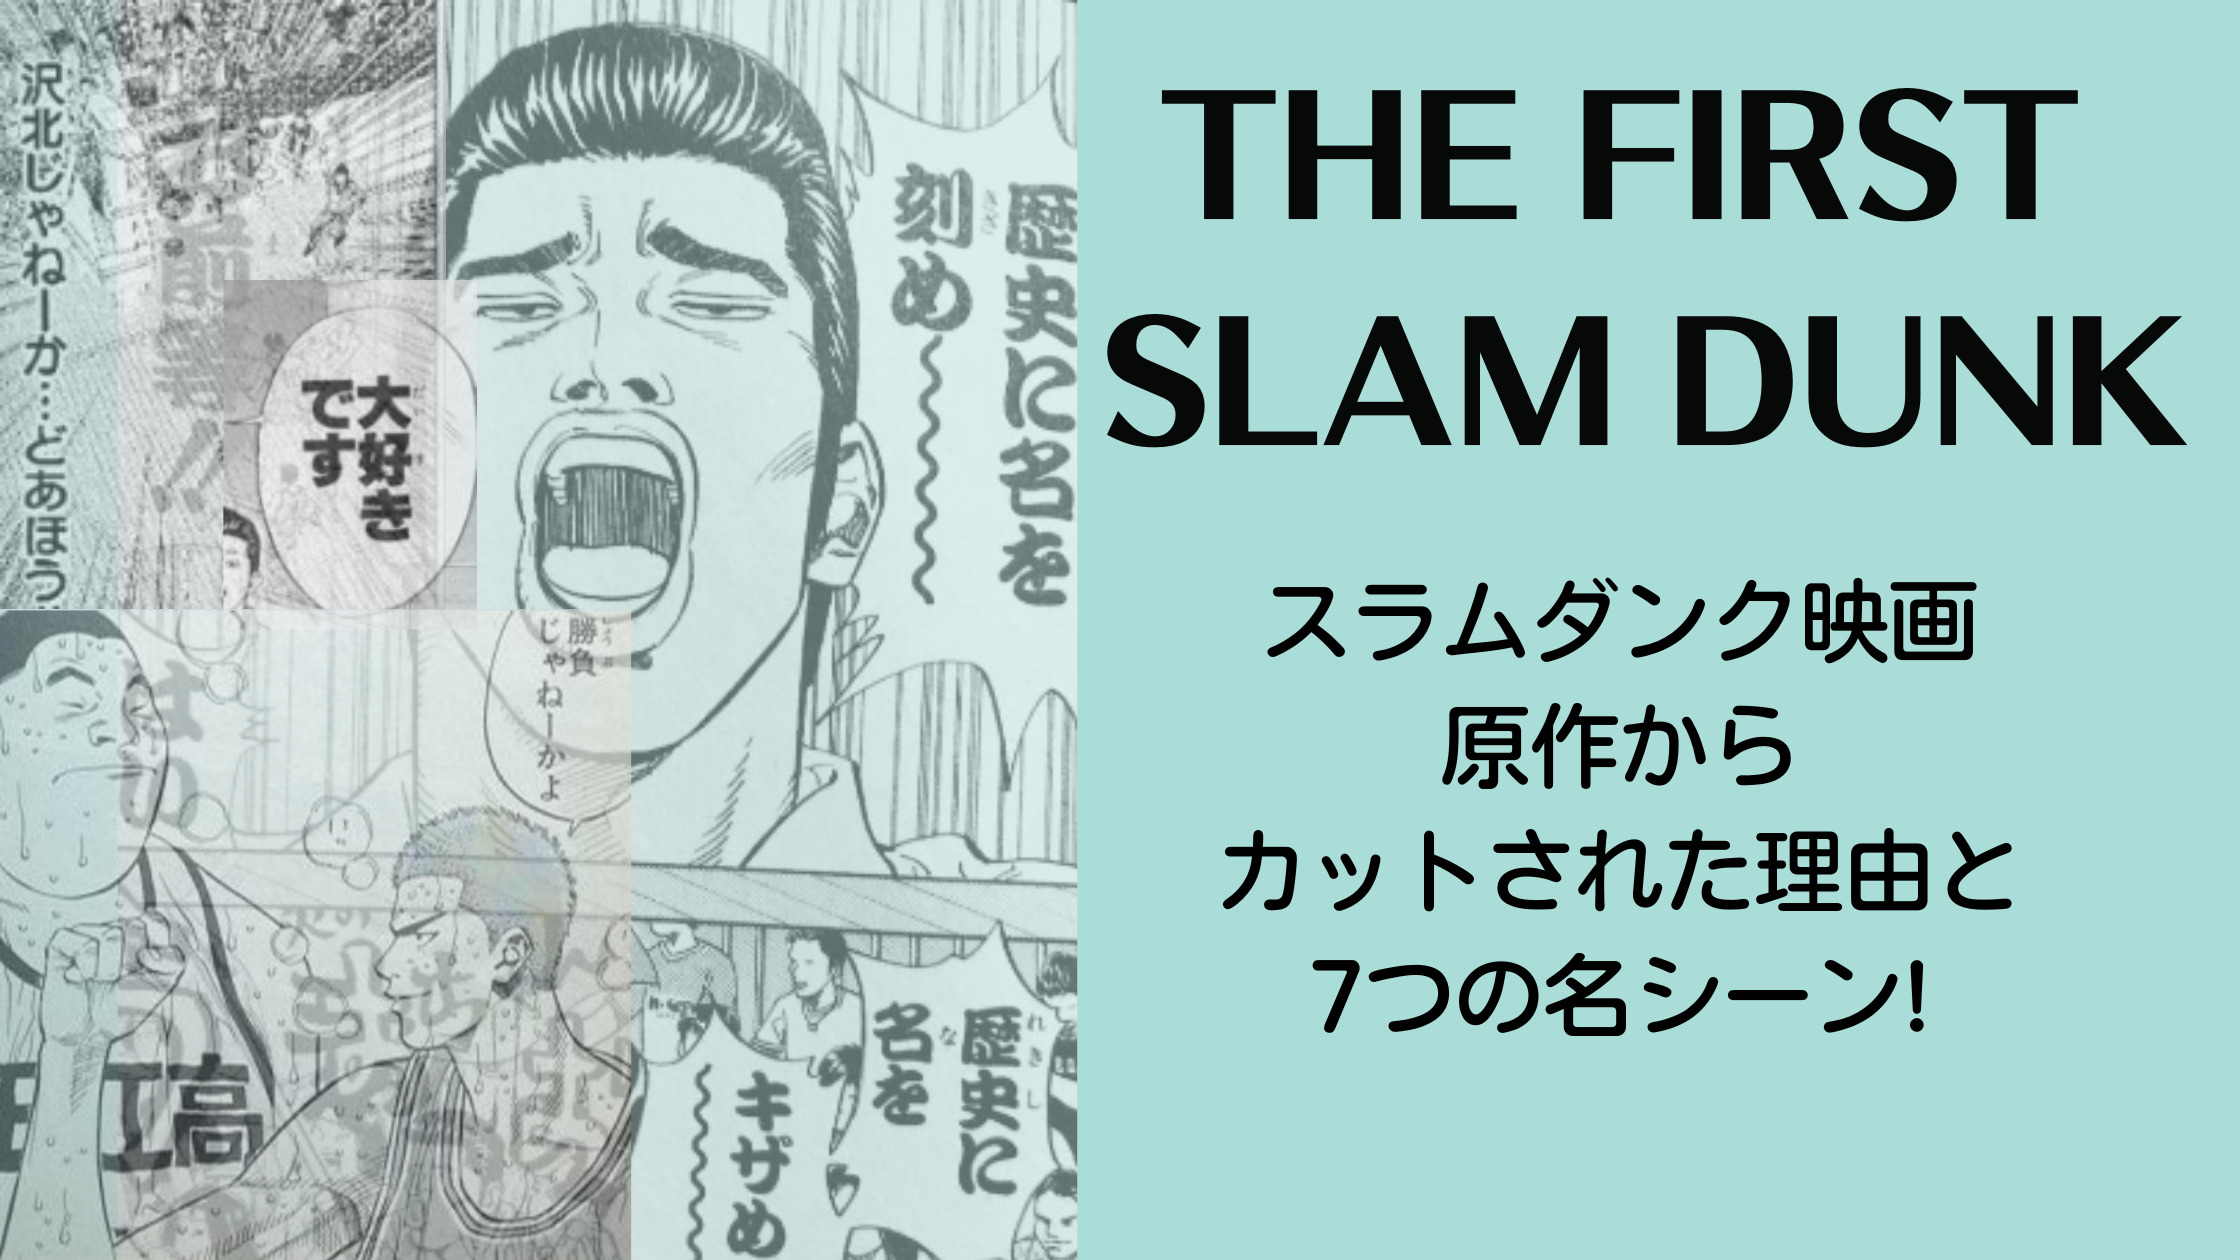 THE FIRST SLAM DUNK原作からカットされた理由と7つの名シーン!